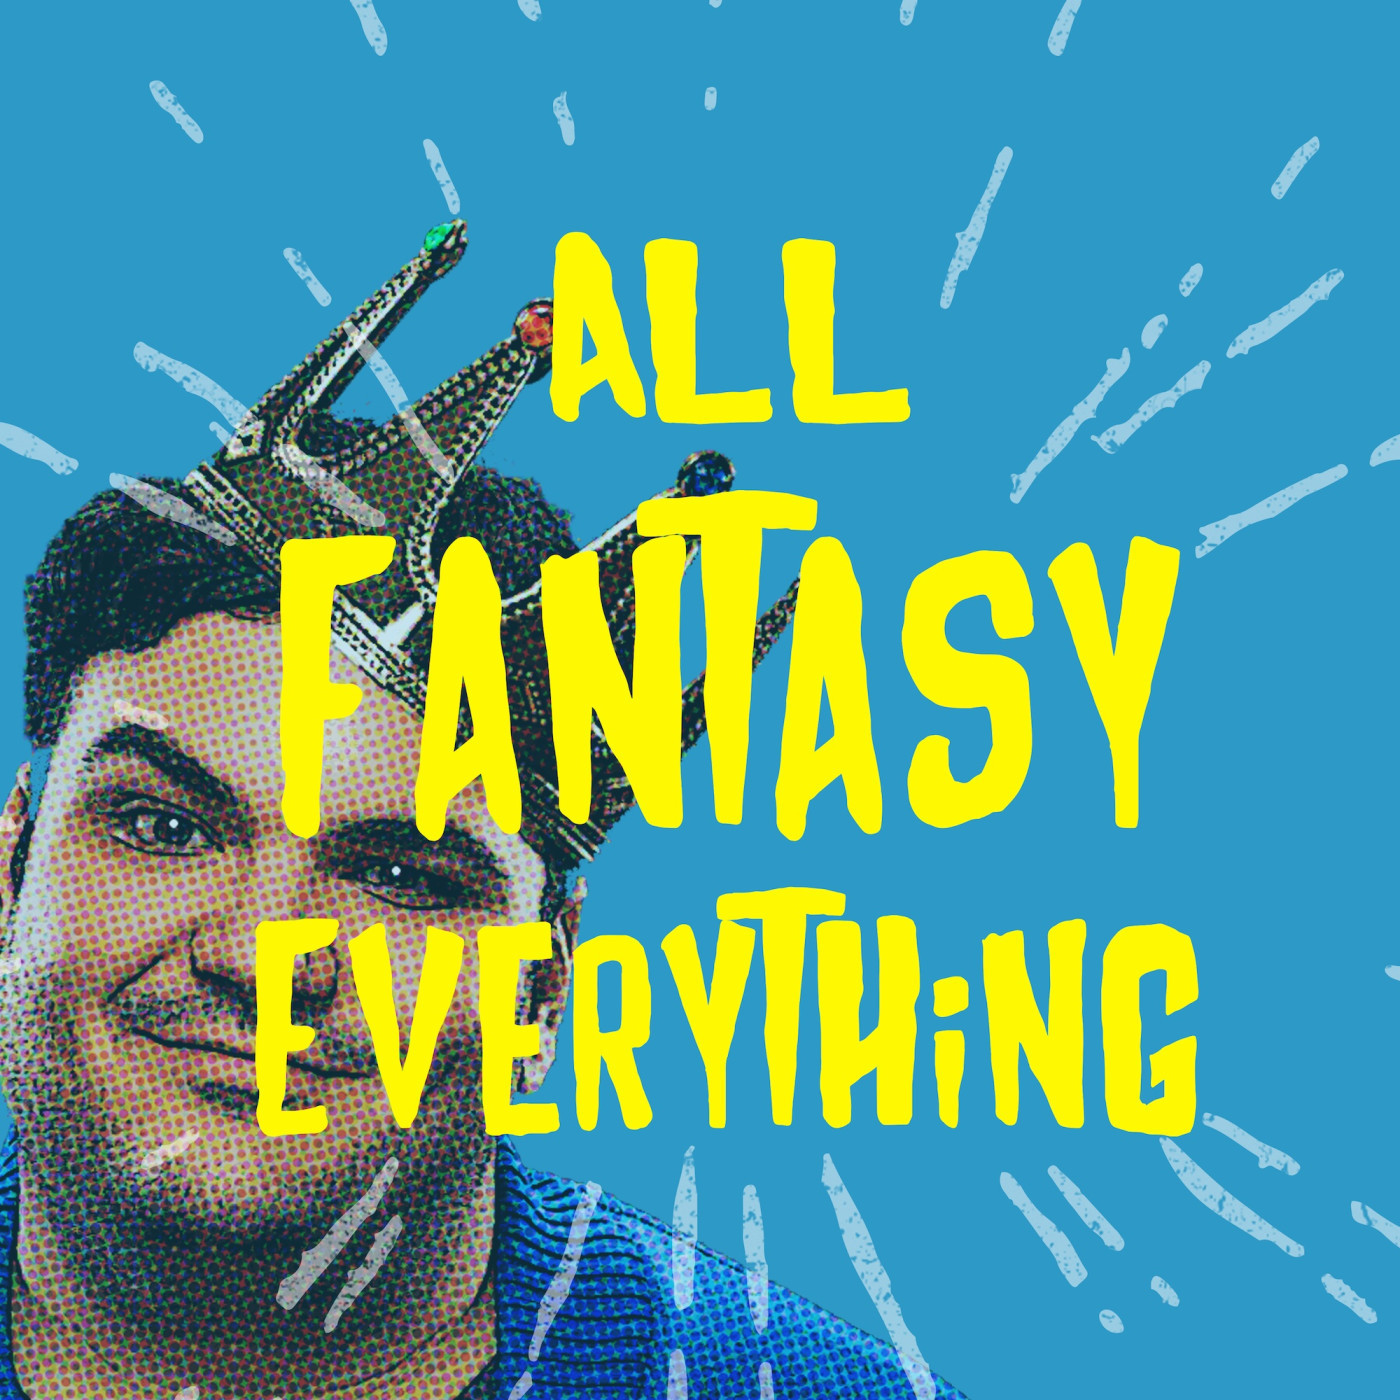 all fantasy everything podcast spotify